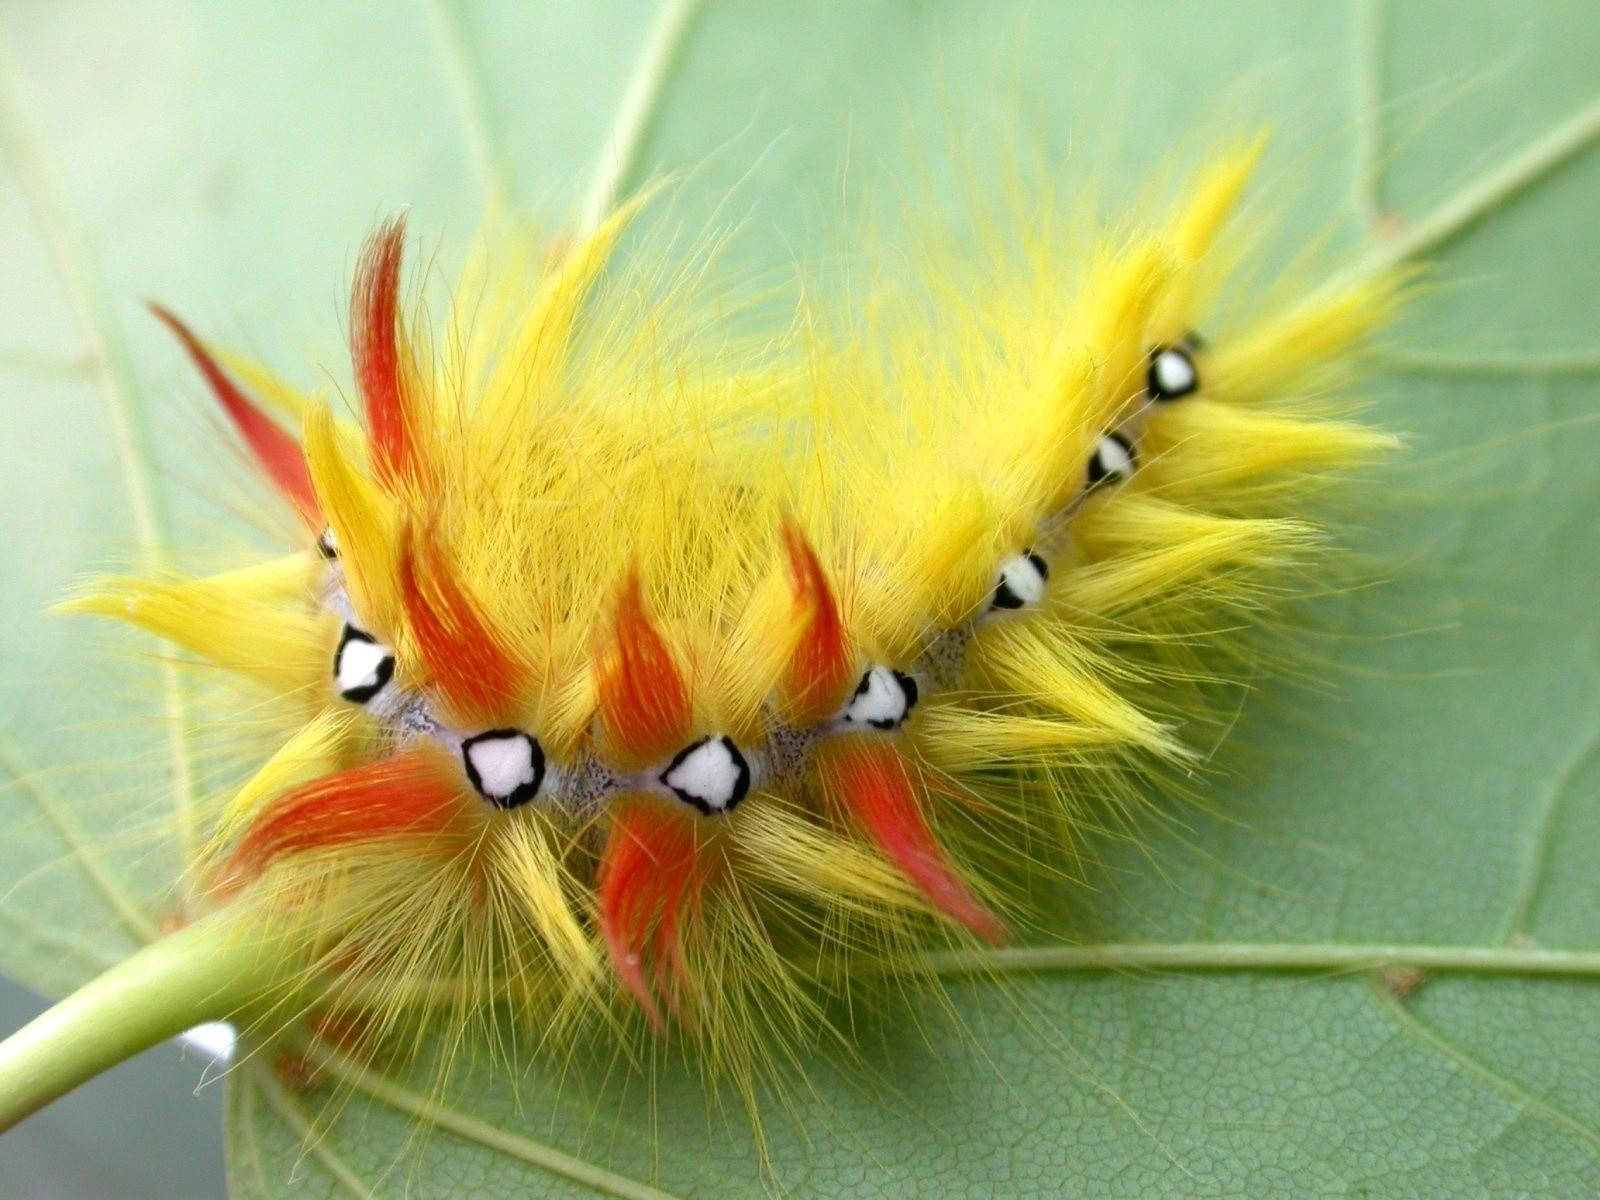 Hairy Yellow Caterpillar In Leaf